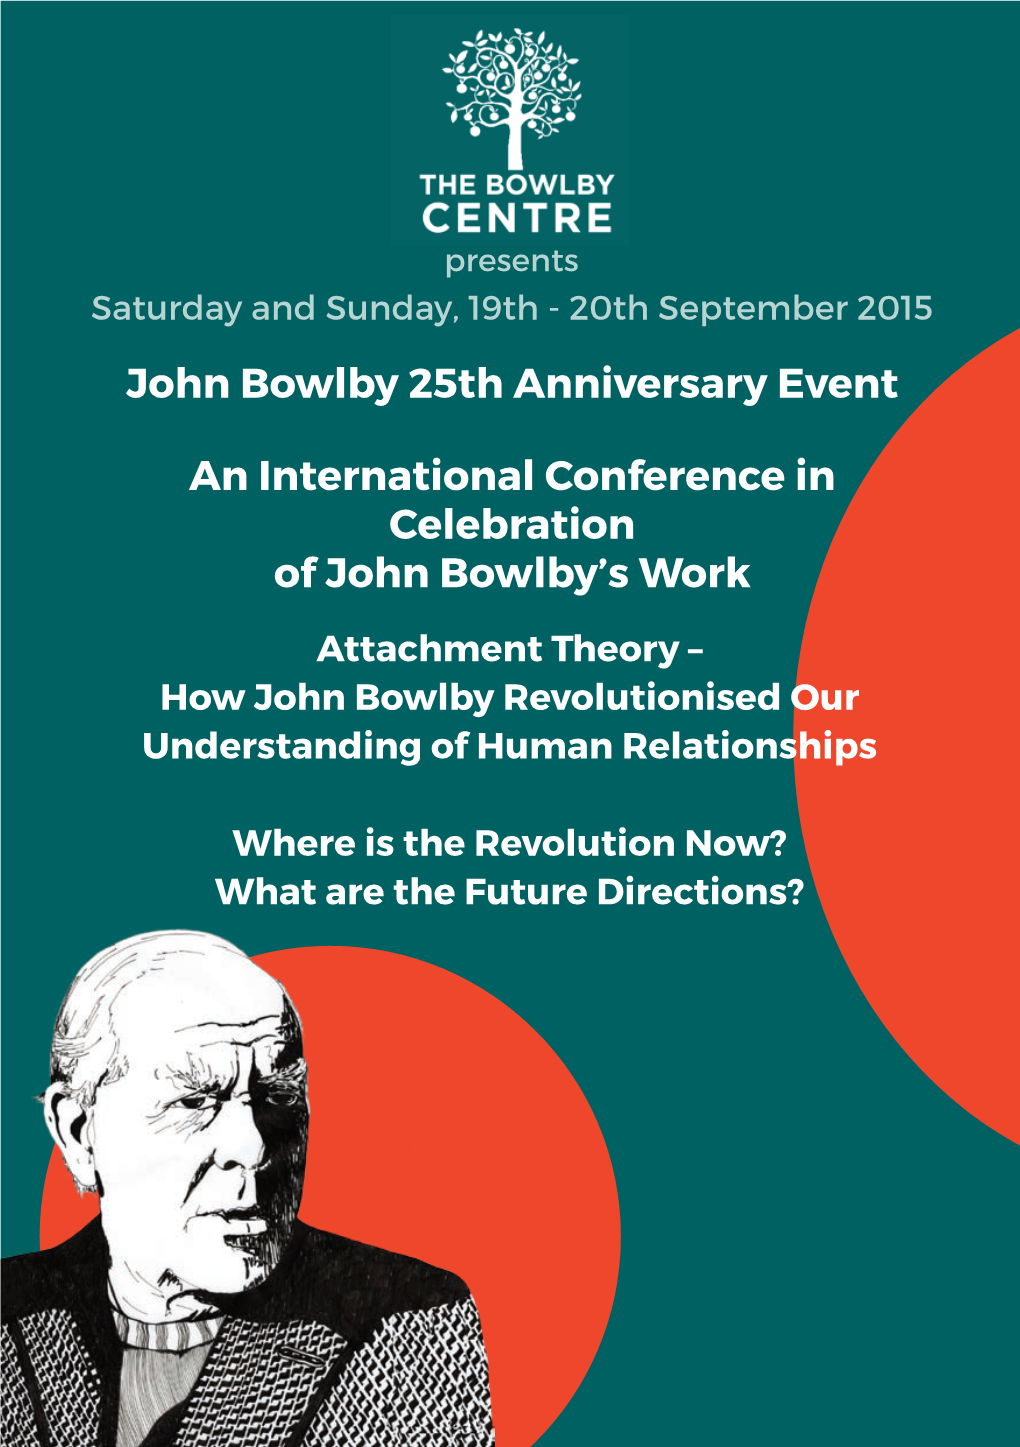 Attachment Theory – How John Bowlby Revolutionised Our Understanding of Human Relationships